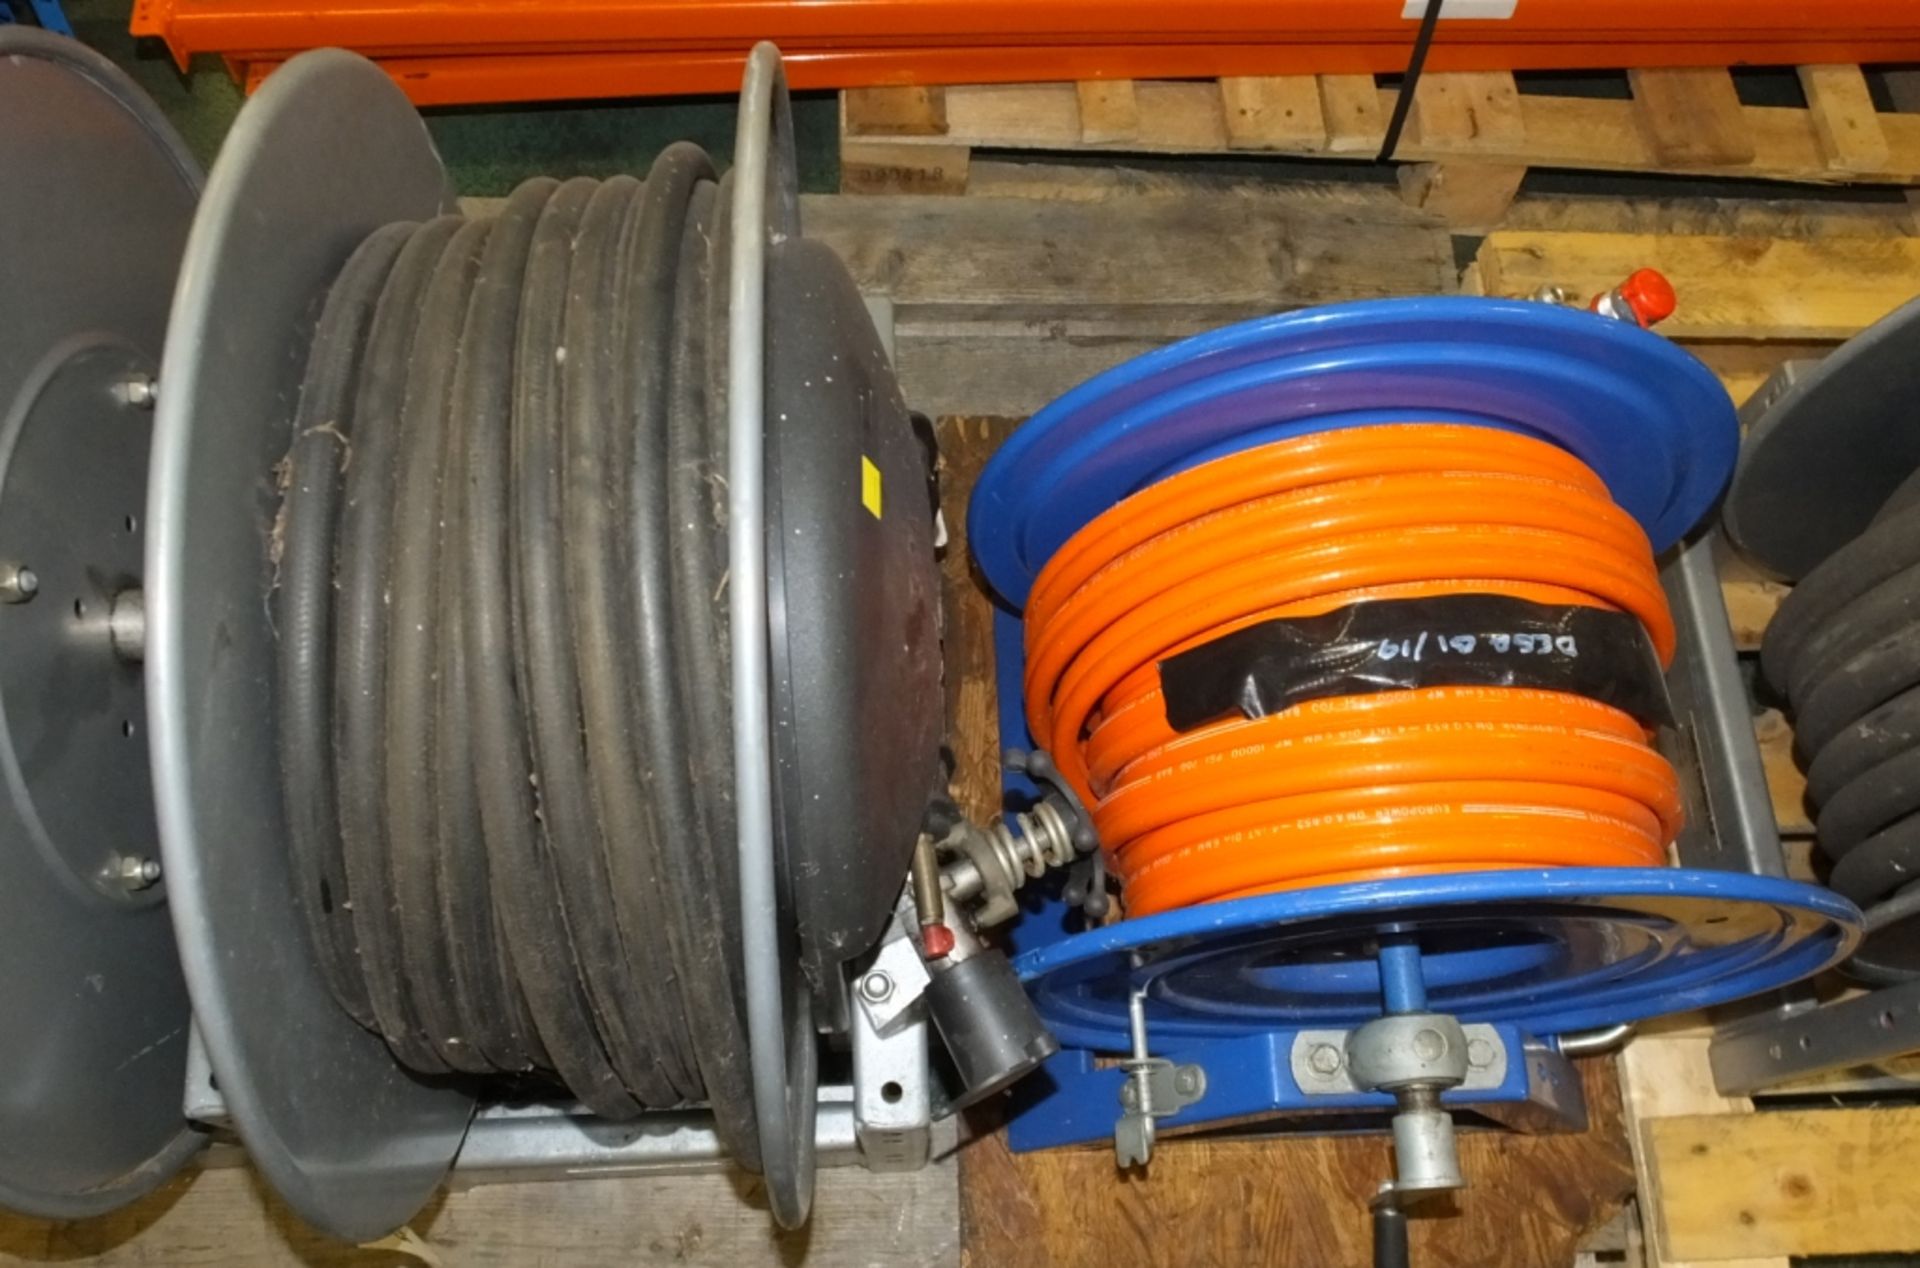 3x Hydraulic hose reels - Youldon - Image 3 of 3